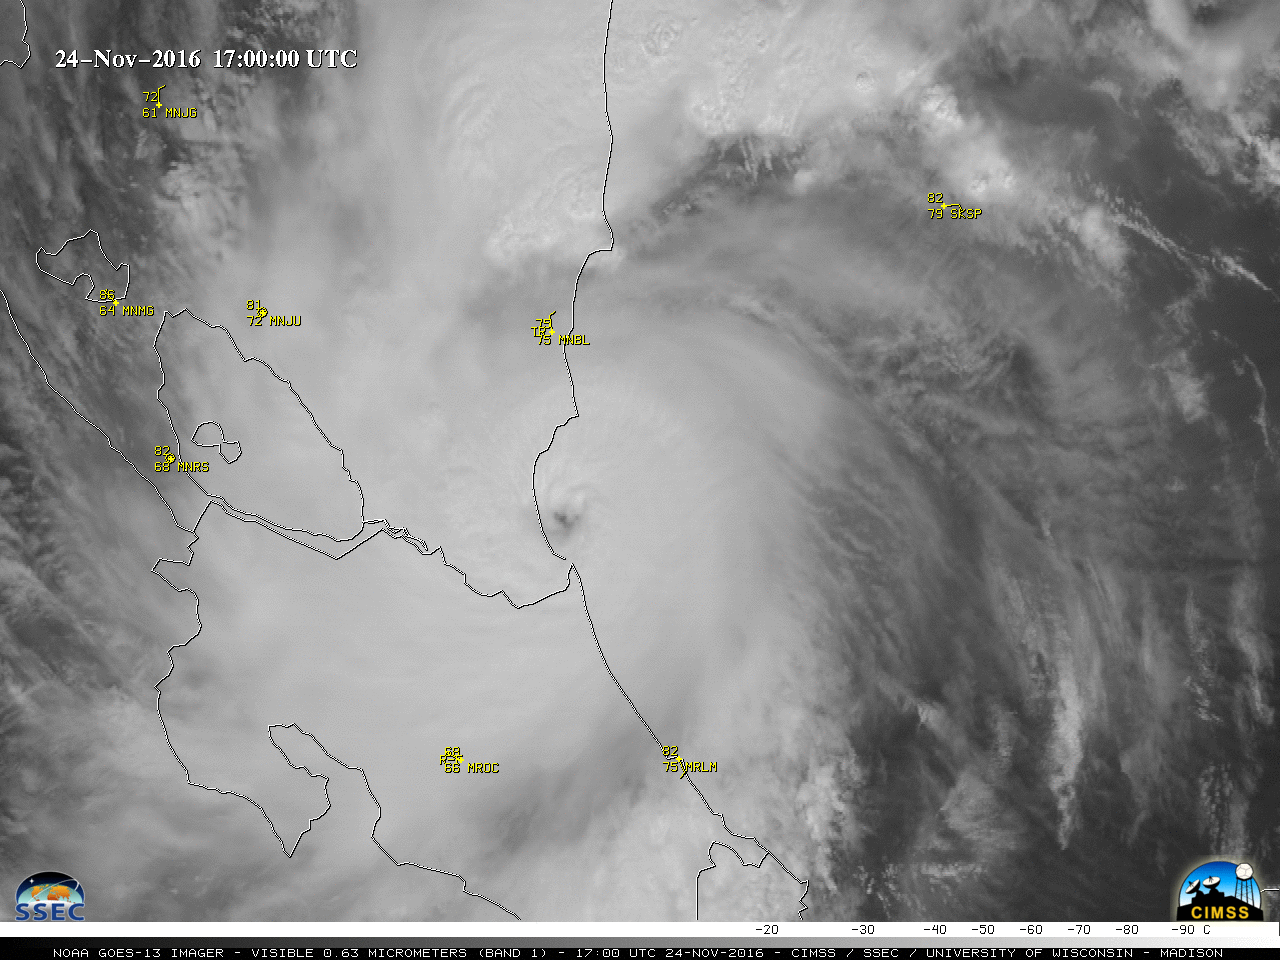 GOES-13 Visible (0.63 µm) images, with hourly surface reports [click to play MP4 animation]